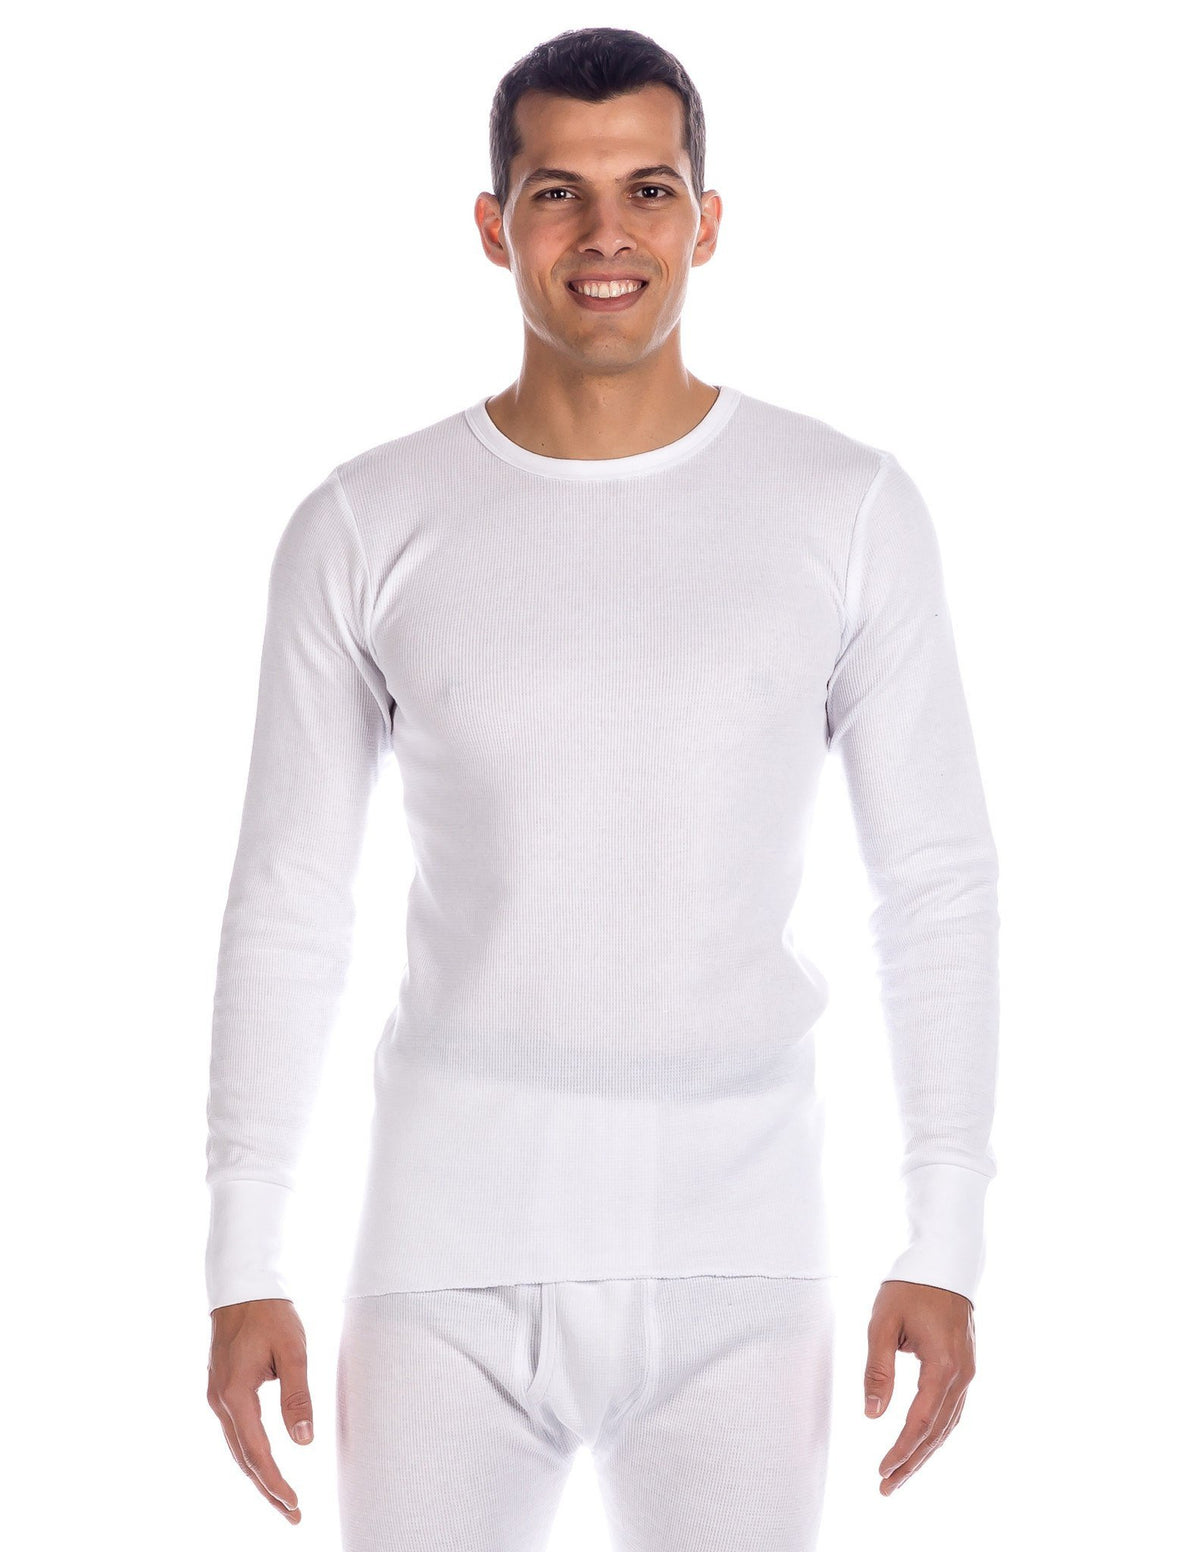 Men's Extreme Cold Waffle Knit Thermal Crew Top - White